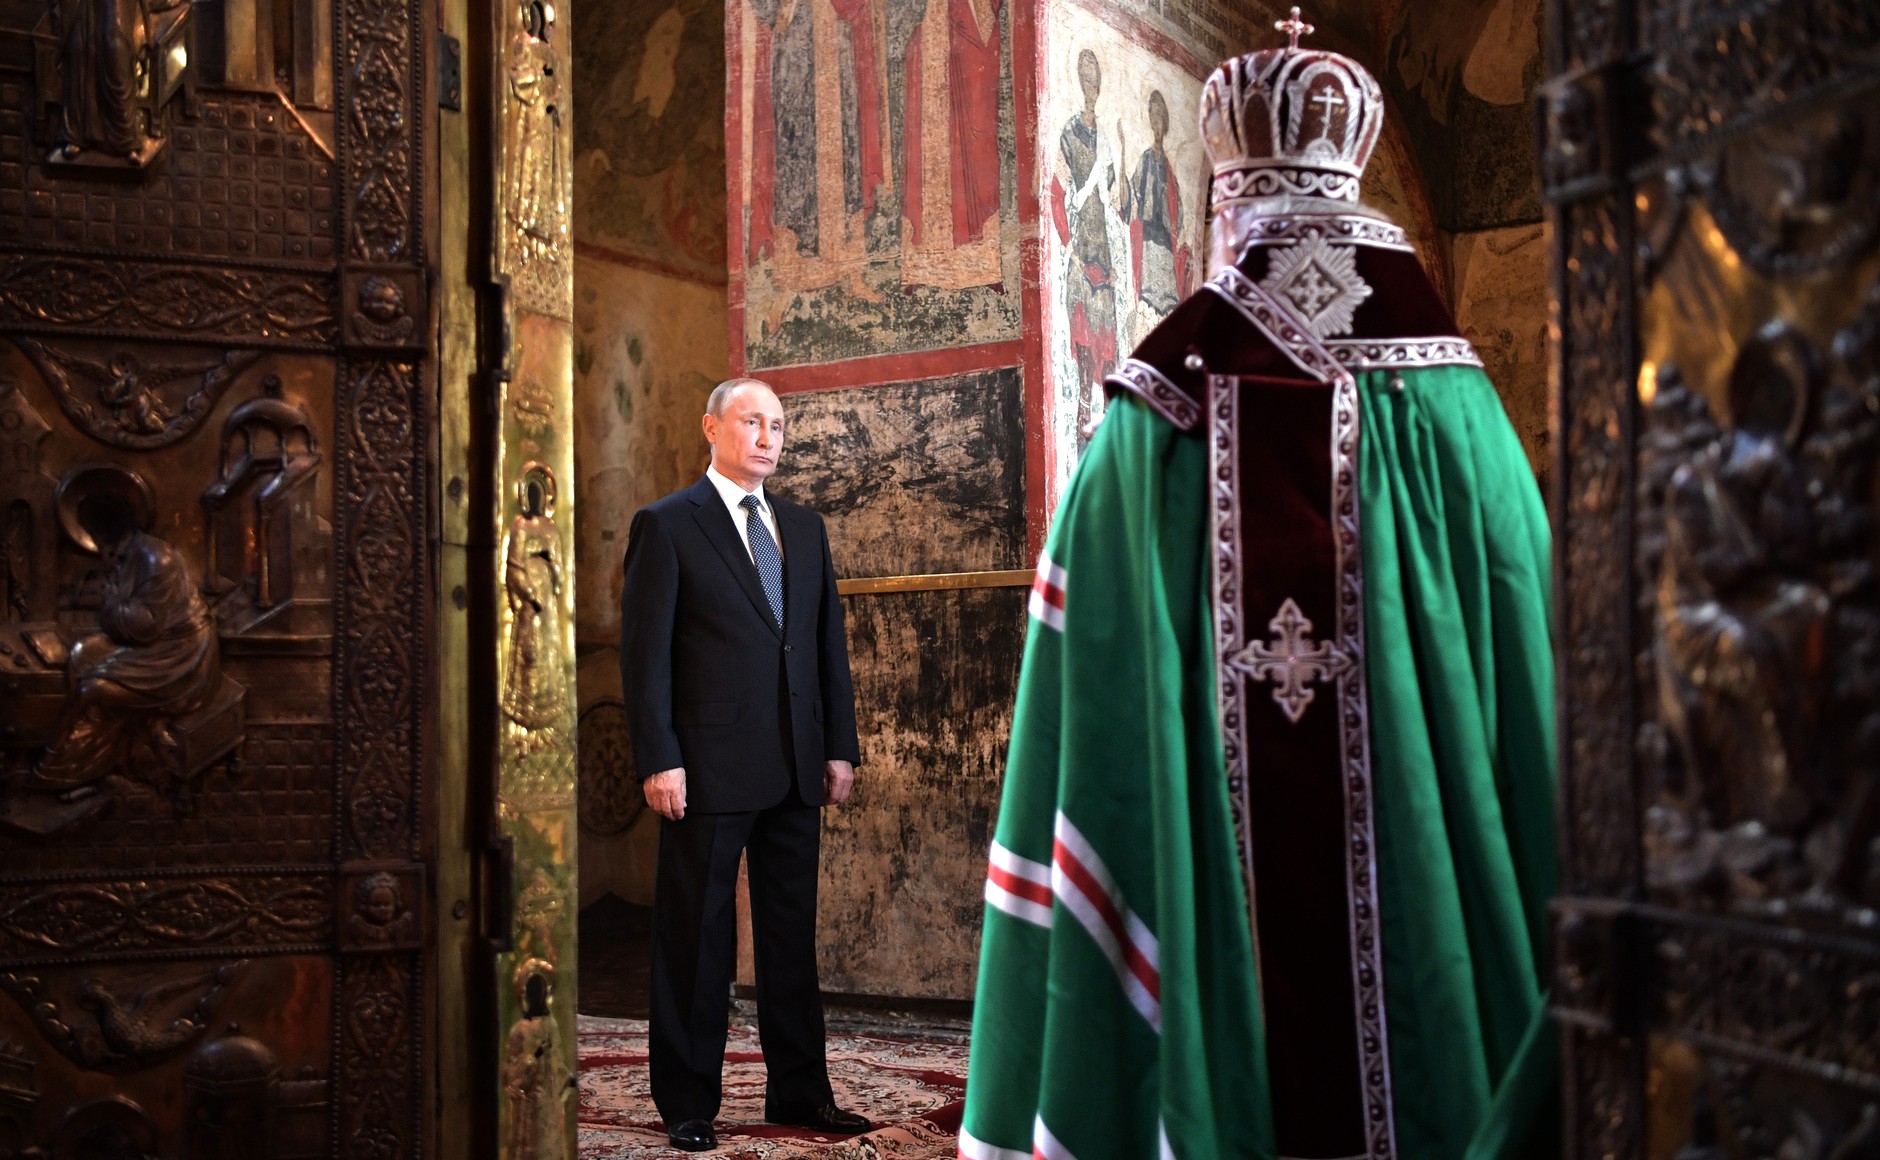 The Religious Sources of Russian Conduct